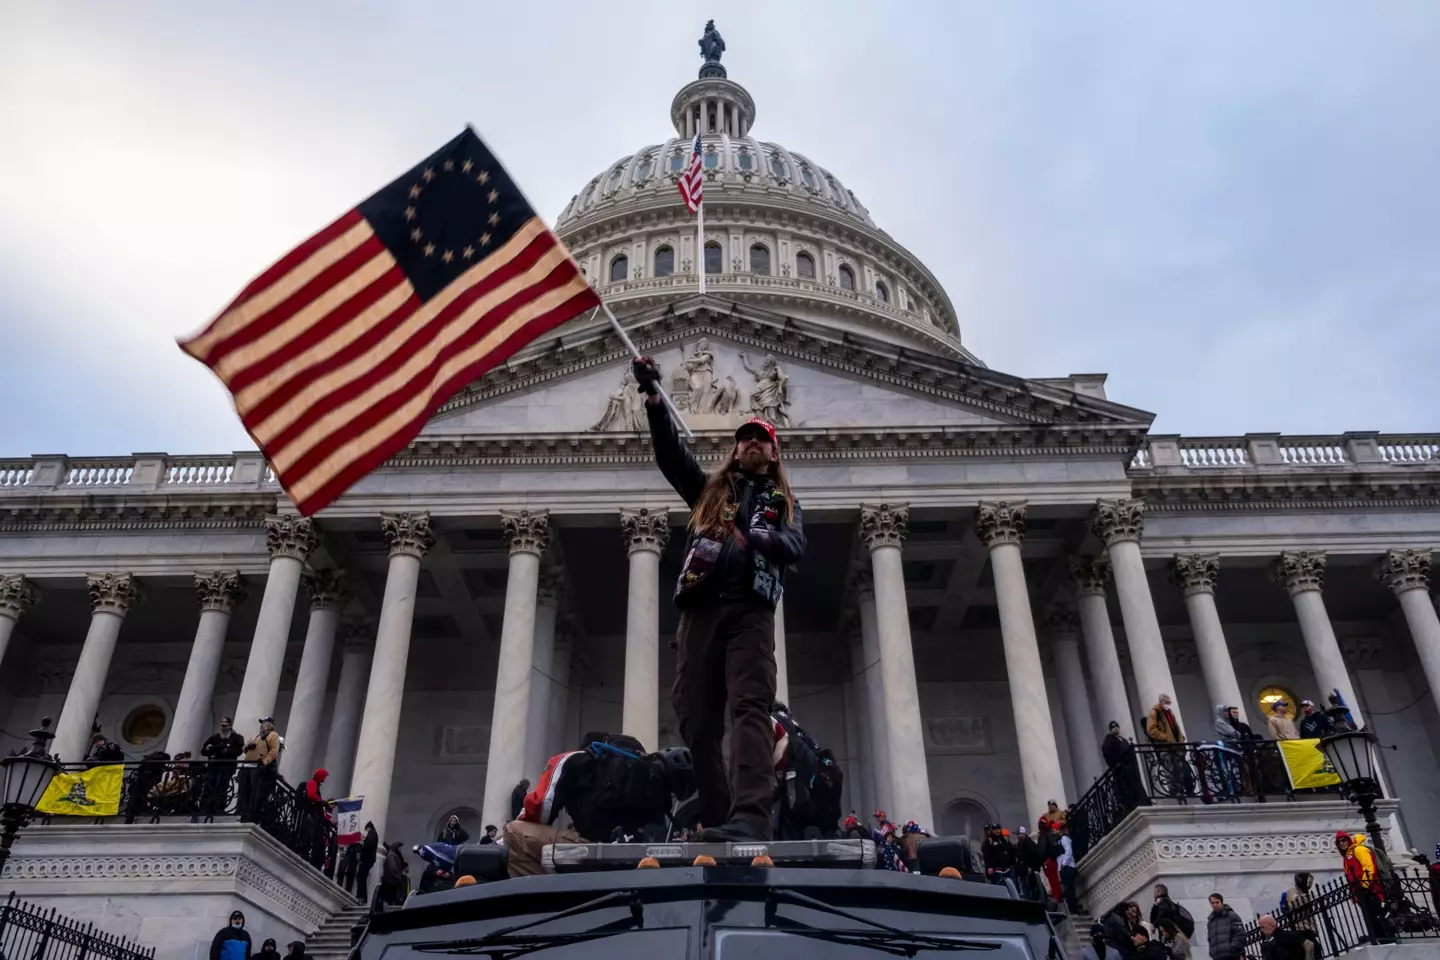 A man waves a flag in front of the Capitol Building during the storming of the building.